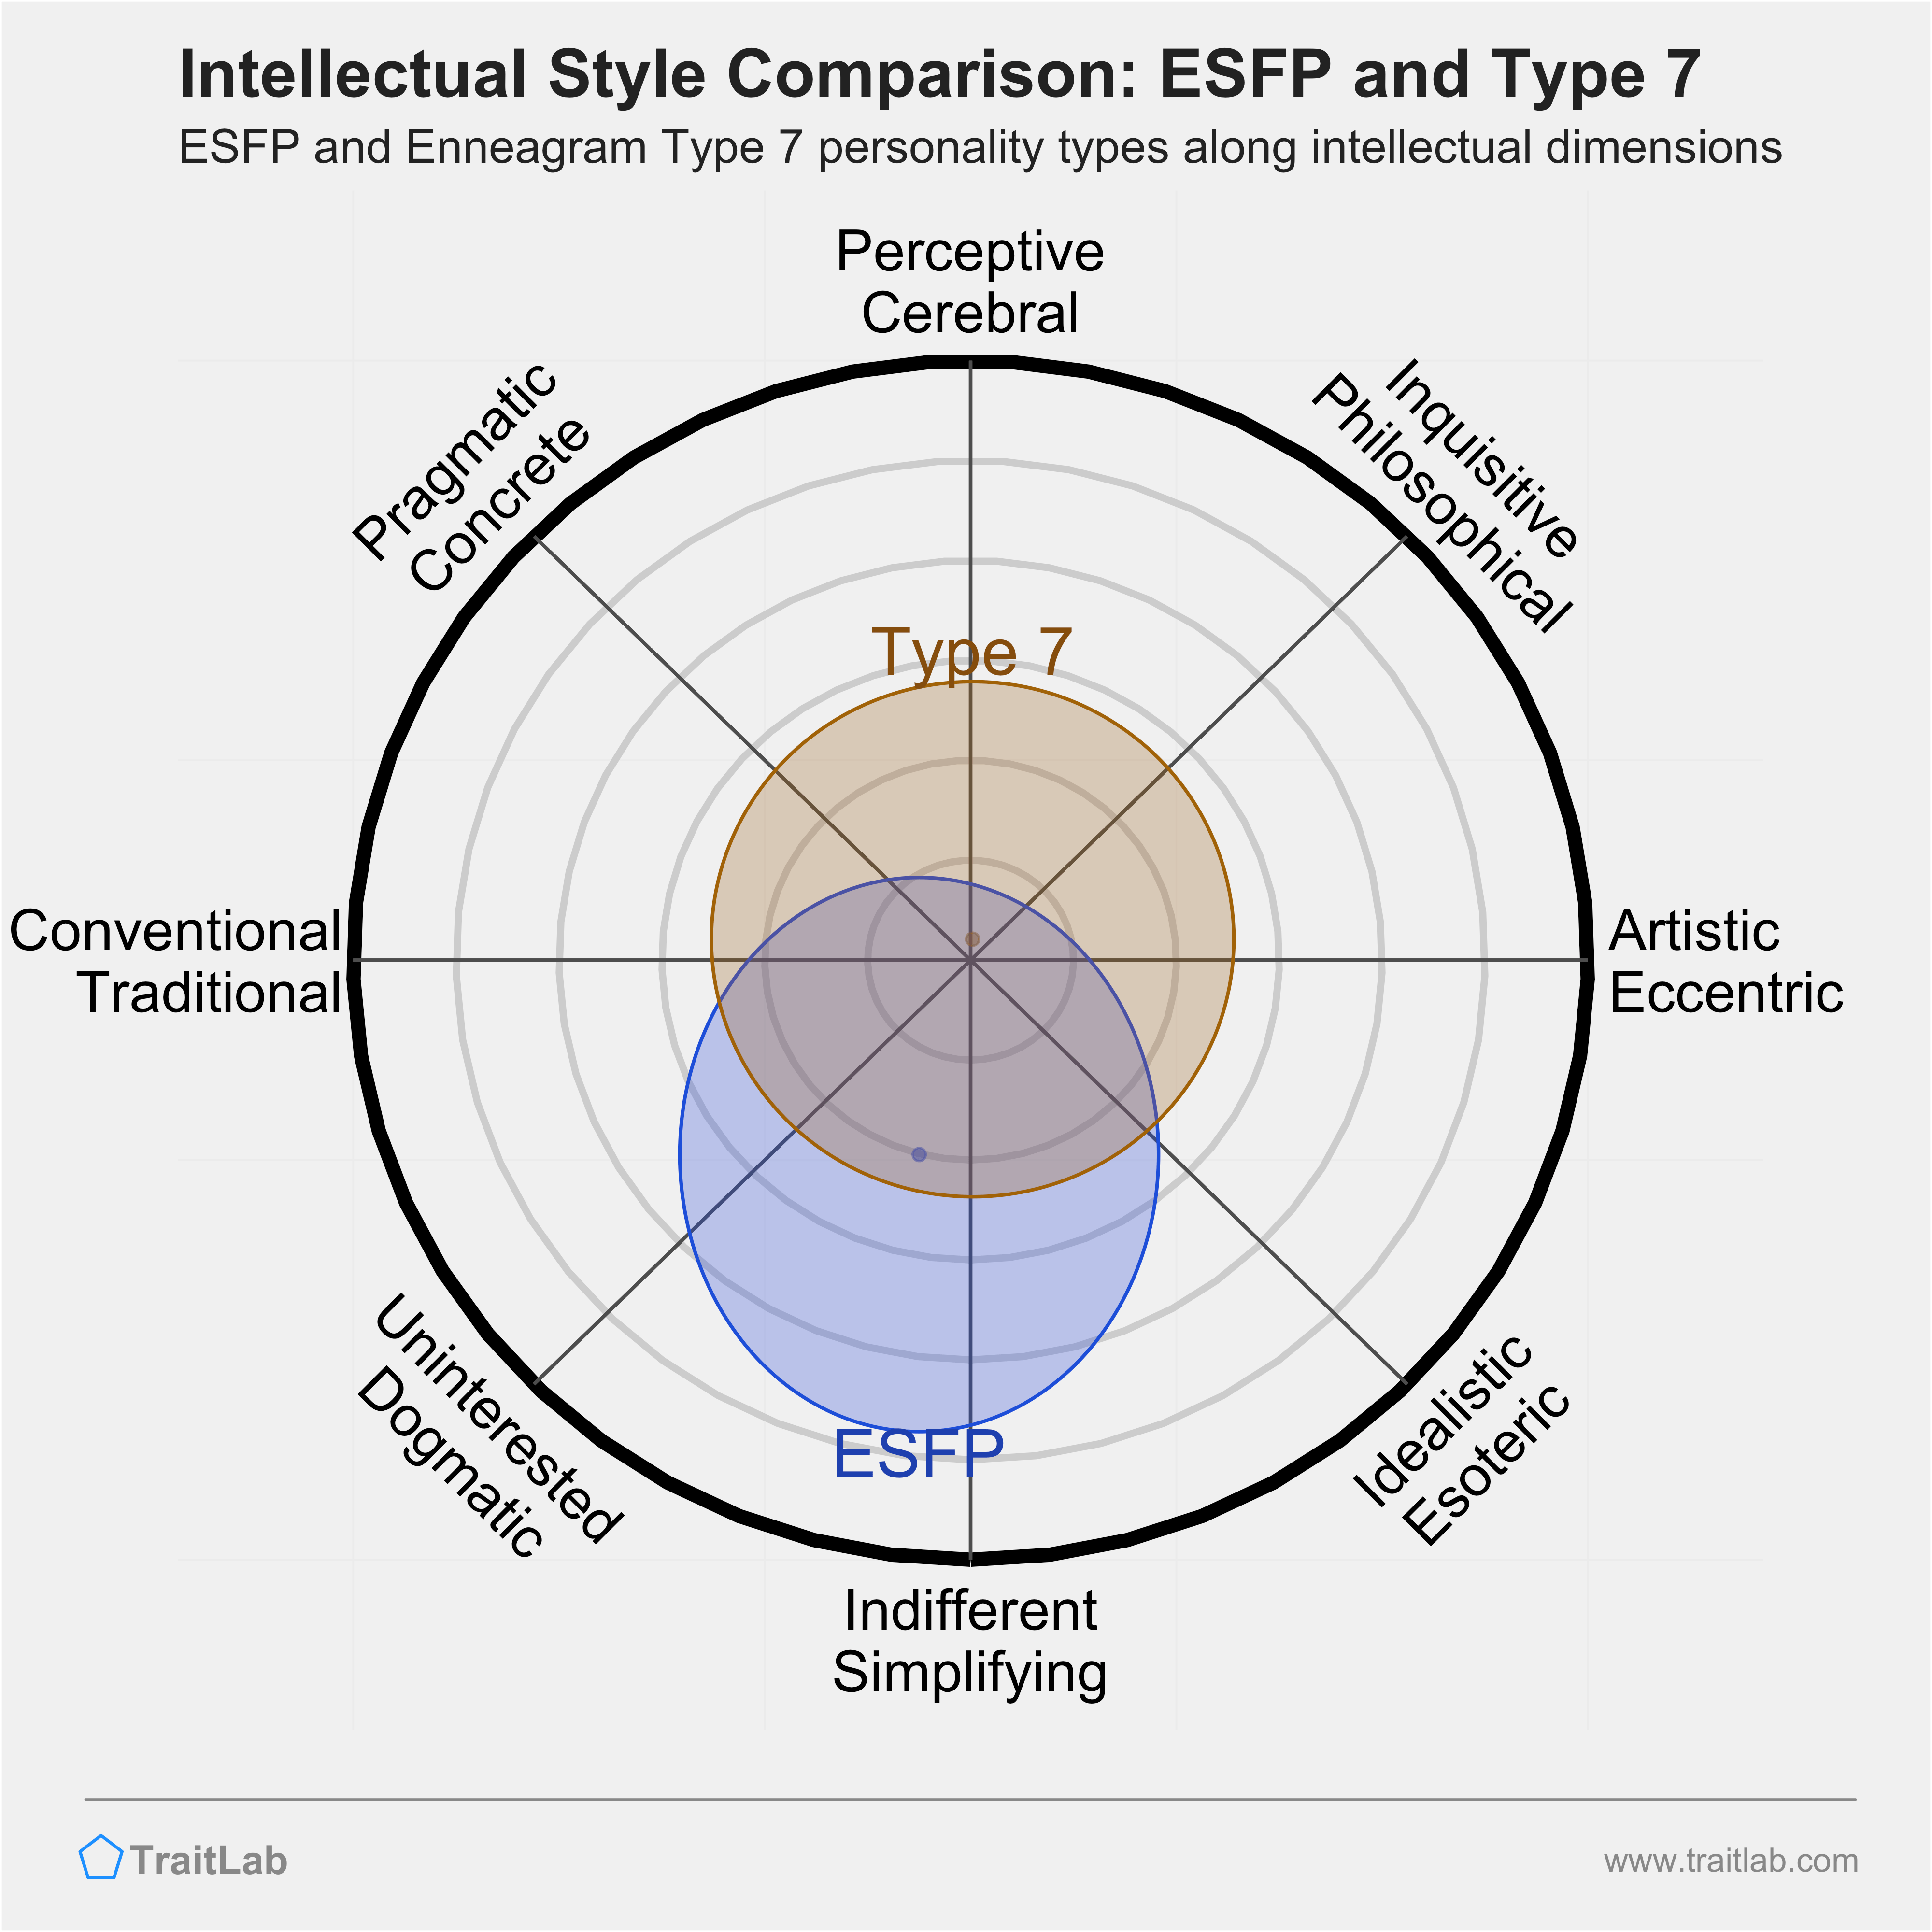 ESFP and Type 7 comparison across intellectual dimensions